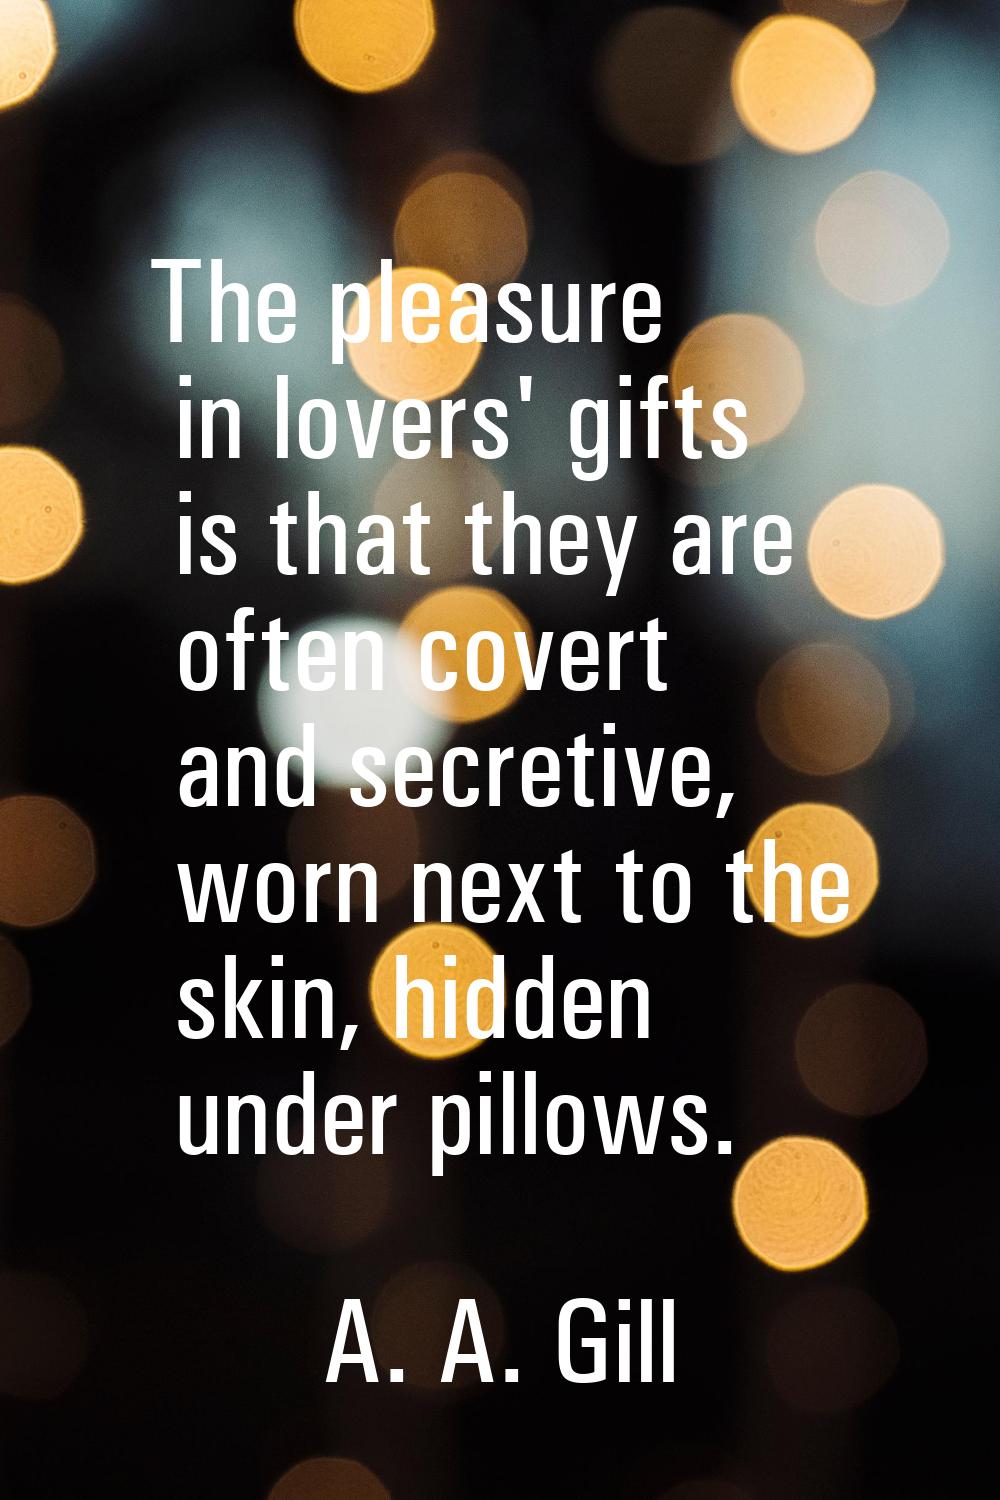 The pleasure in lovers' gifts is that they are often covert and secretive, worn next to the skin, h